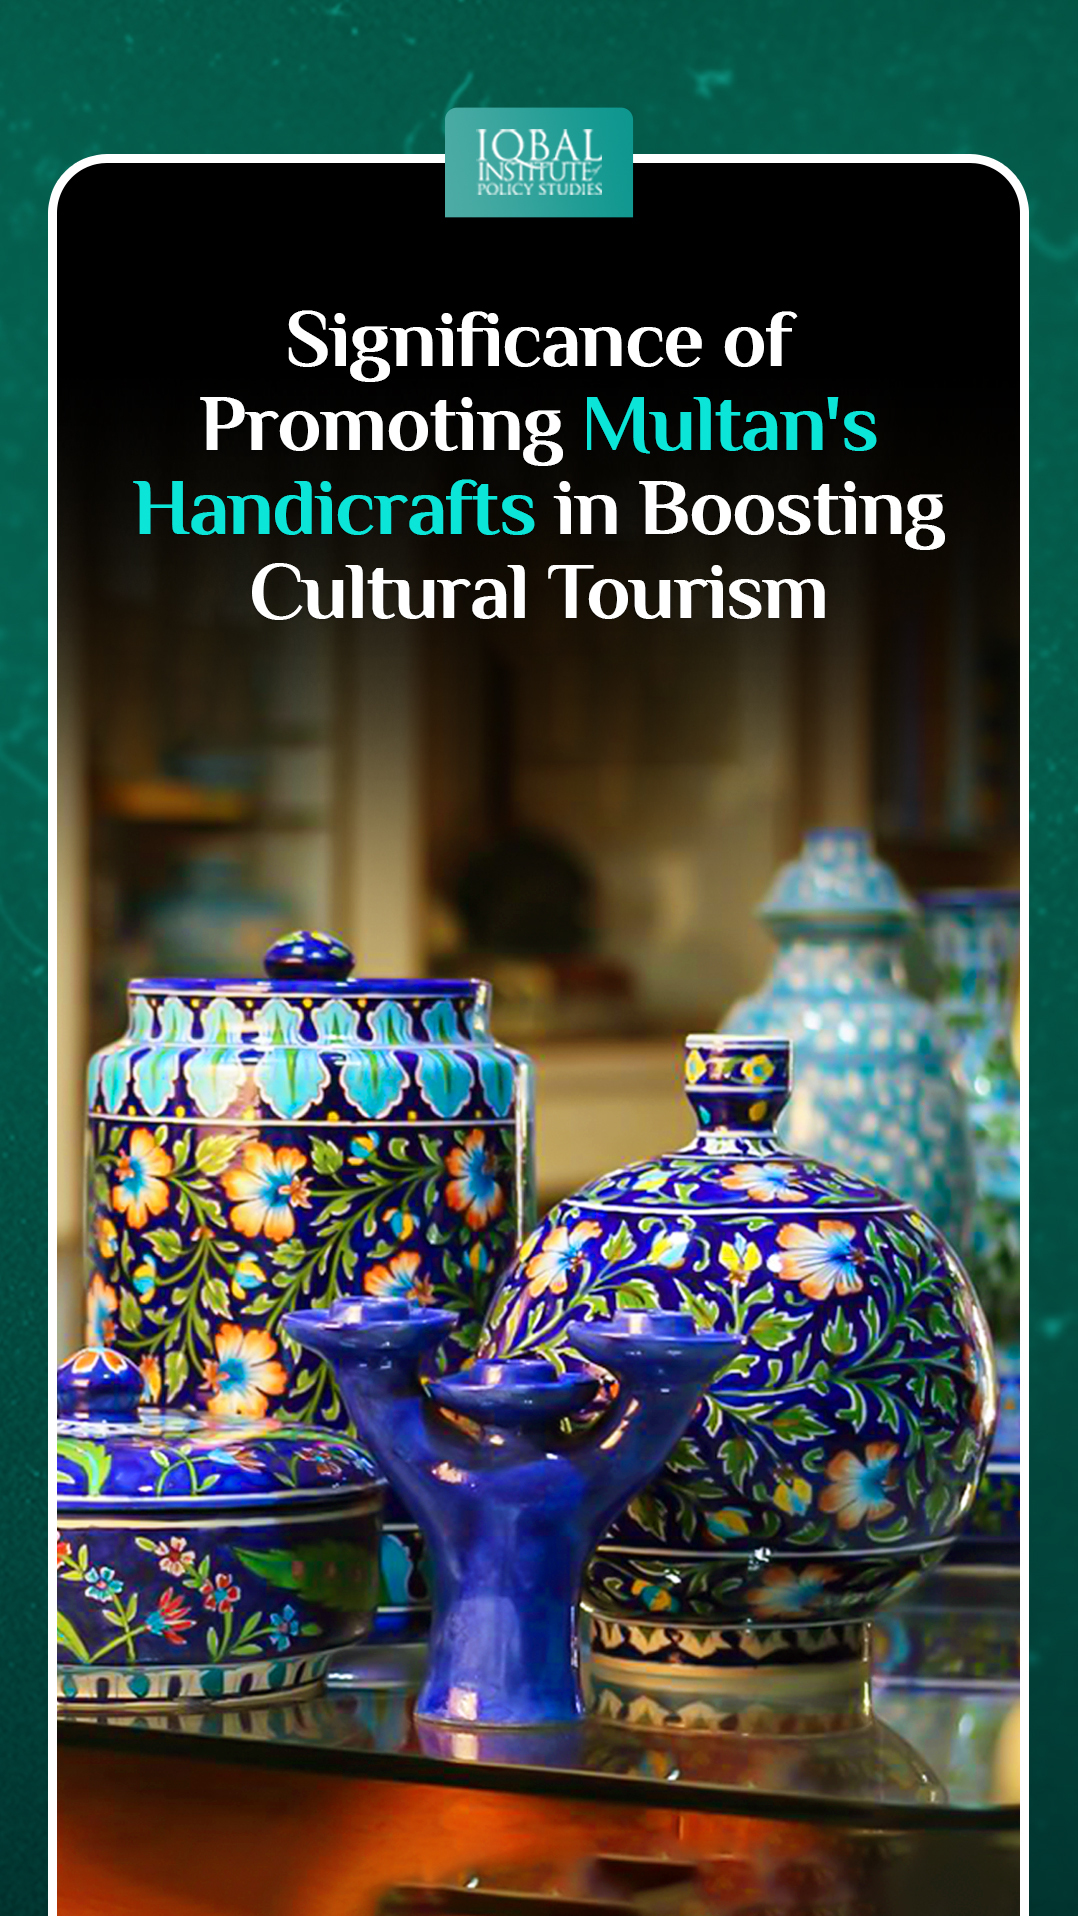 Significance of promoting Multan's Handicrafts in Boosting Cultural Tourism